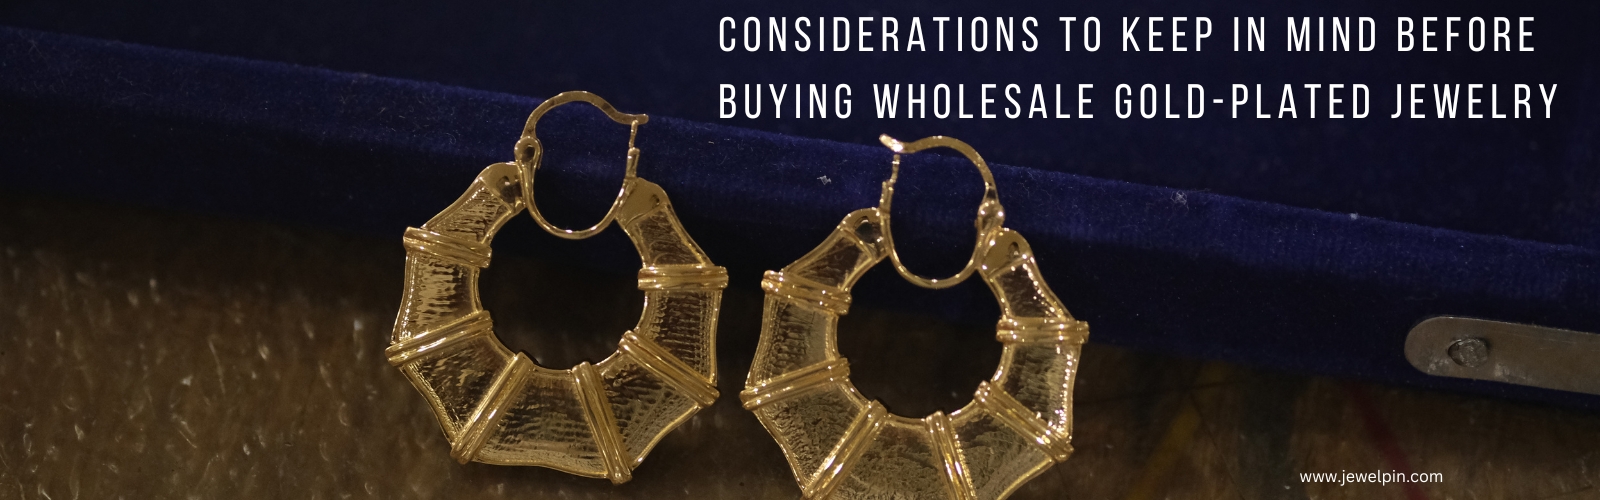 considerations to keep in mind before buying wholesale gold plated jewellery